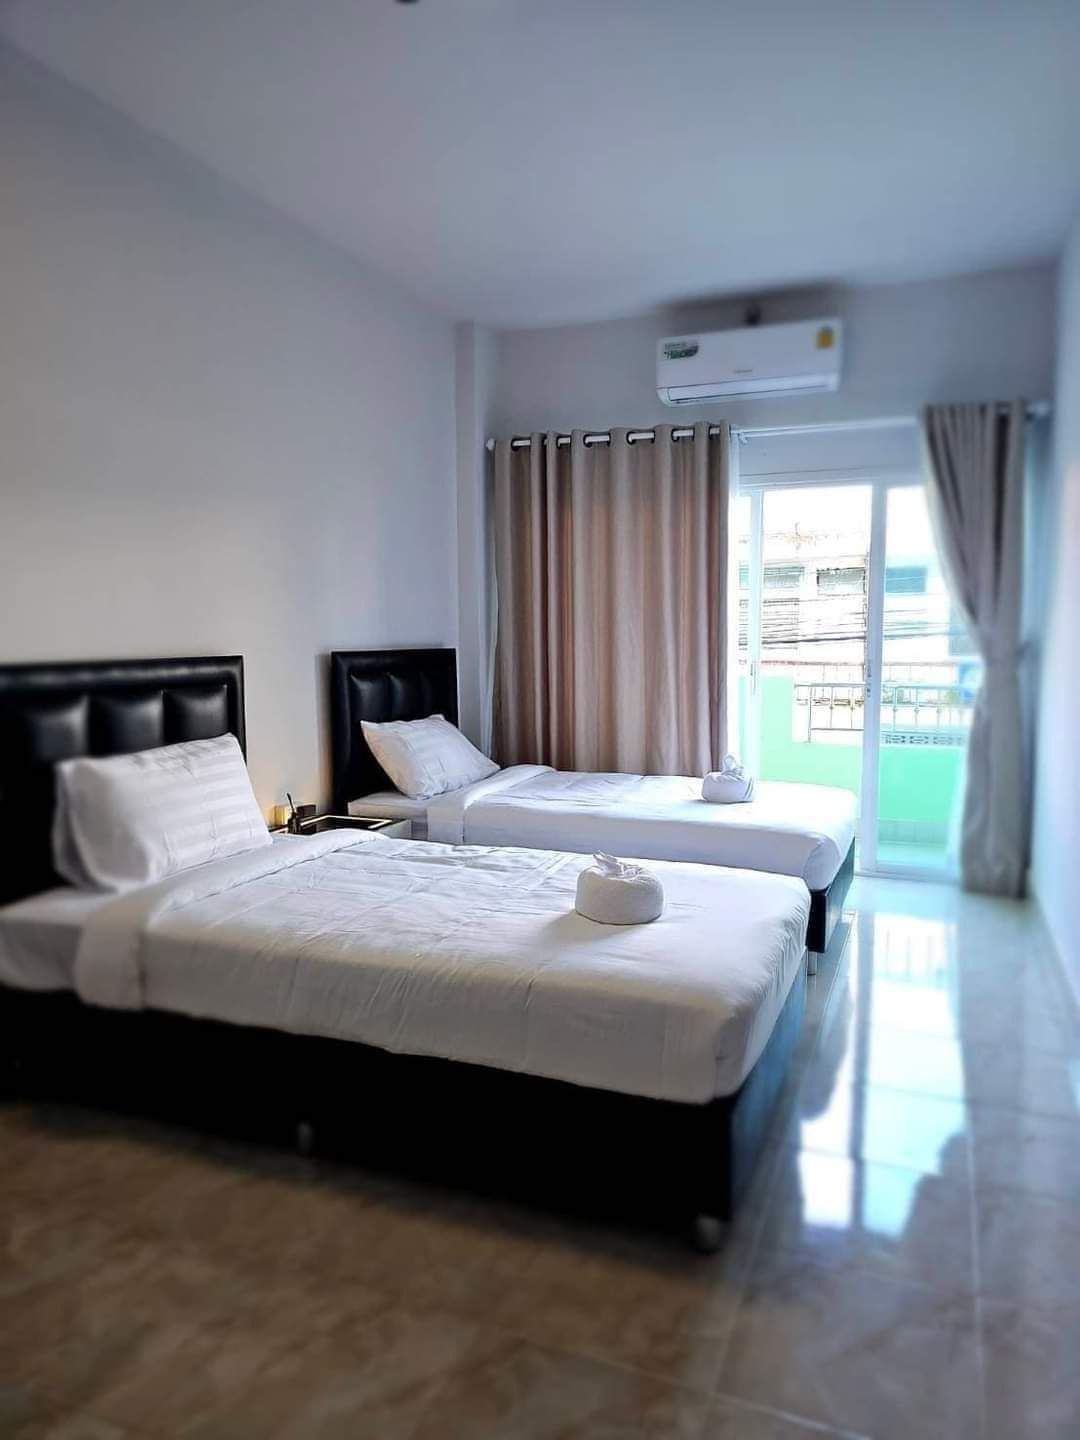 BanChahomm Guesthouse​
1
(Twinbed with balcony)​